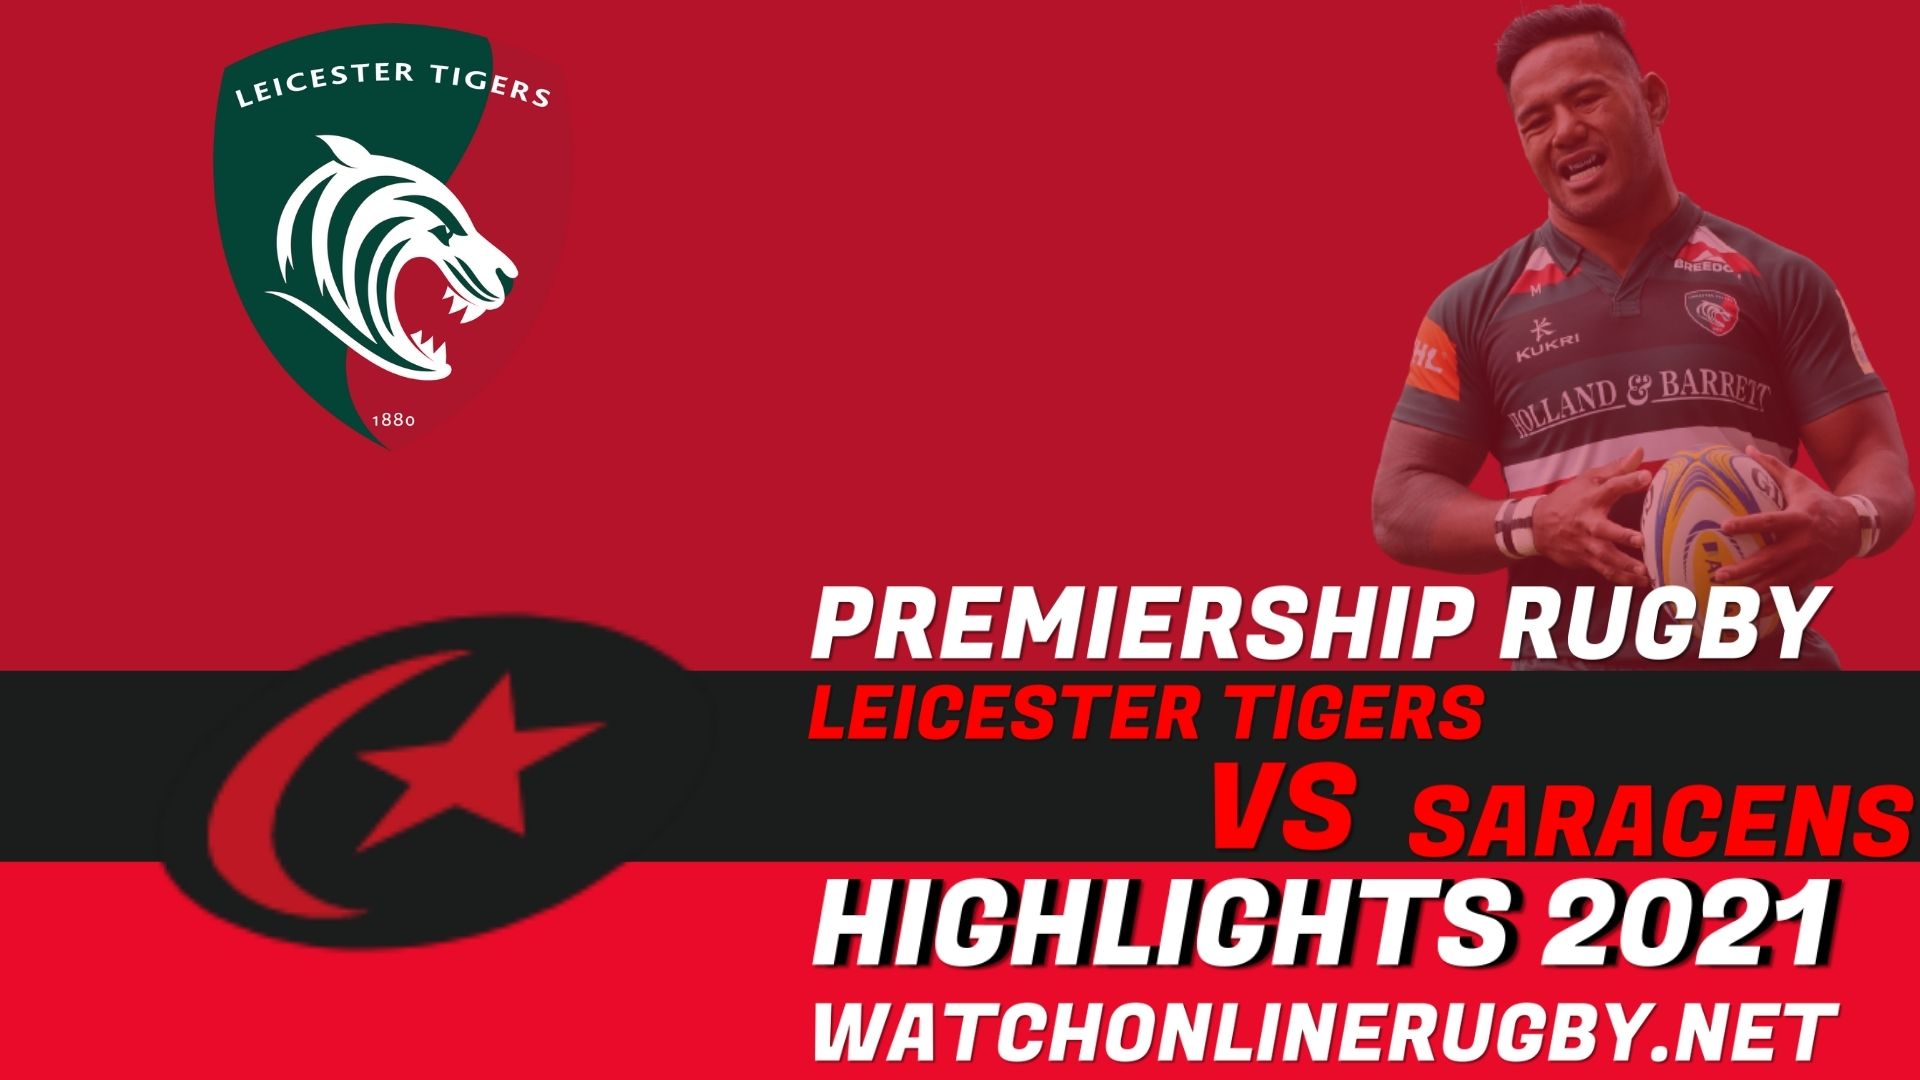 Leicester Tigers Vs Saracens Premiership Rugby 2021 RD 3